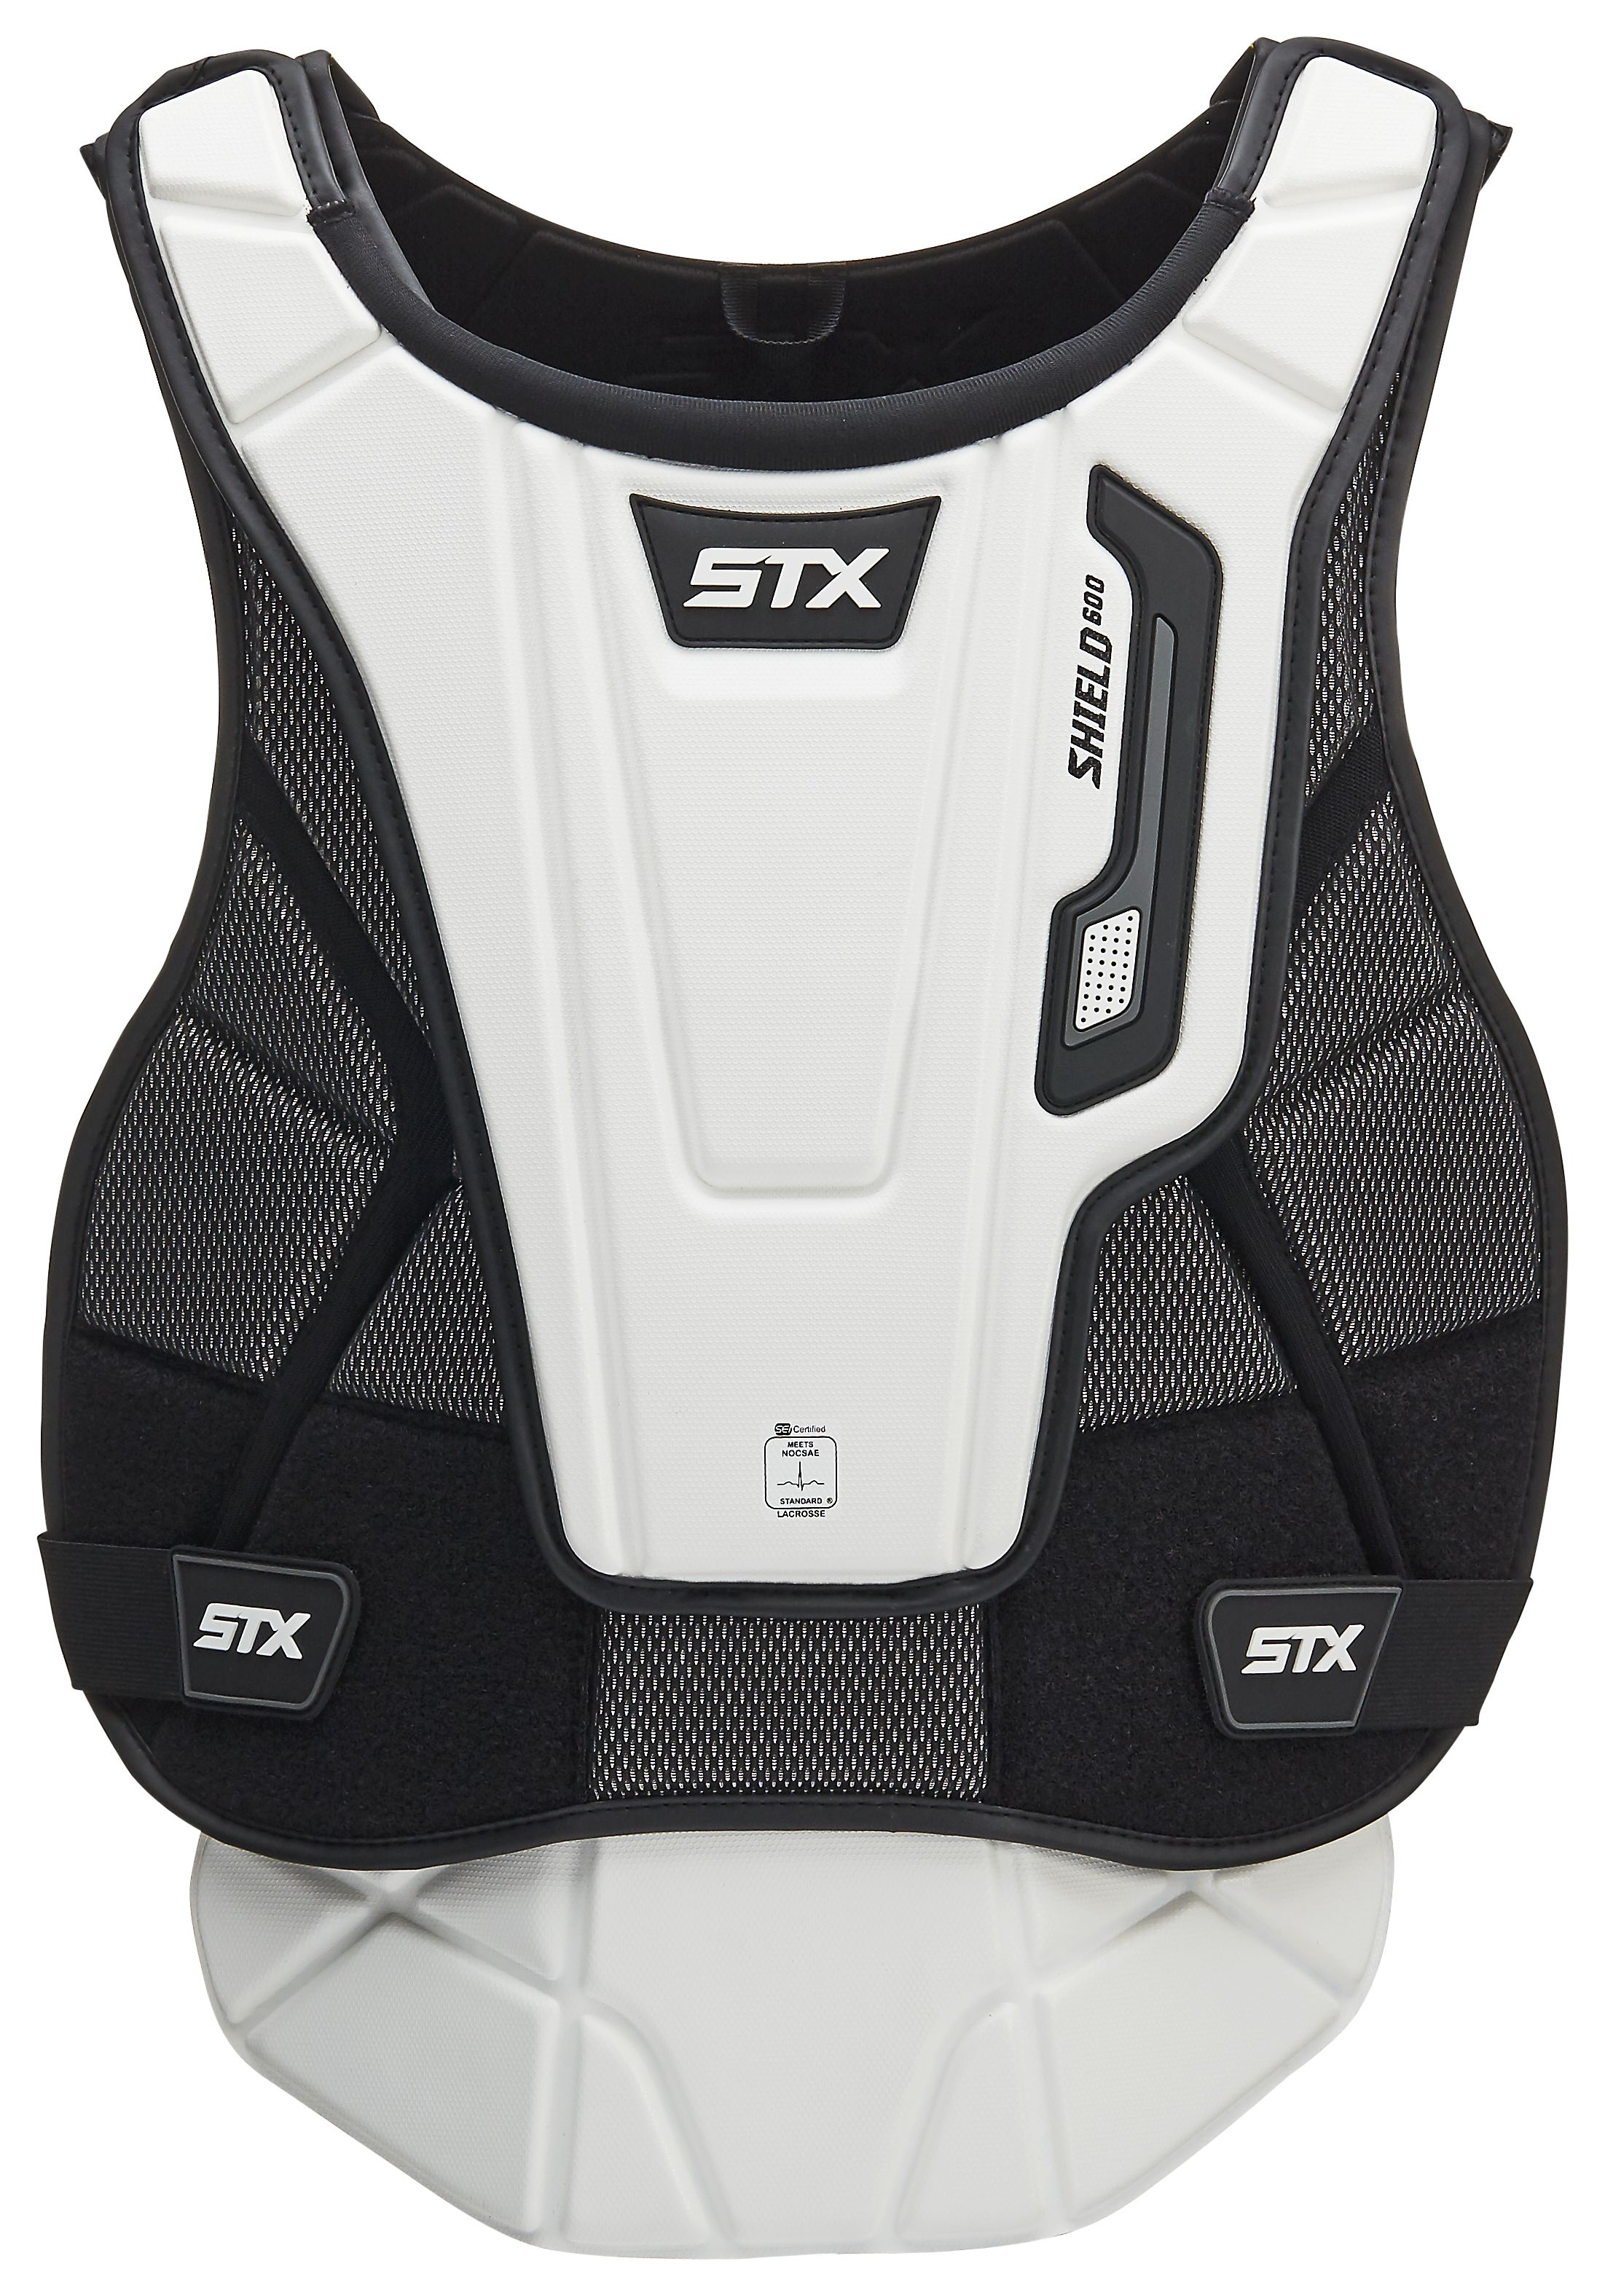 Shield 600™ Goalie Chest Protector